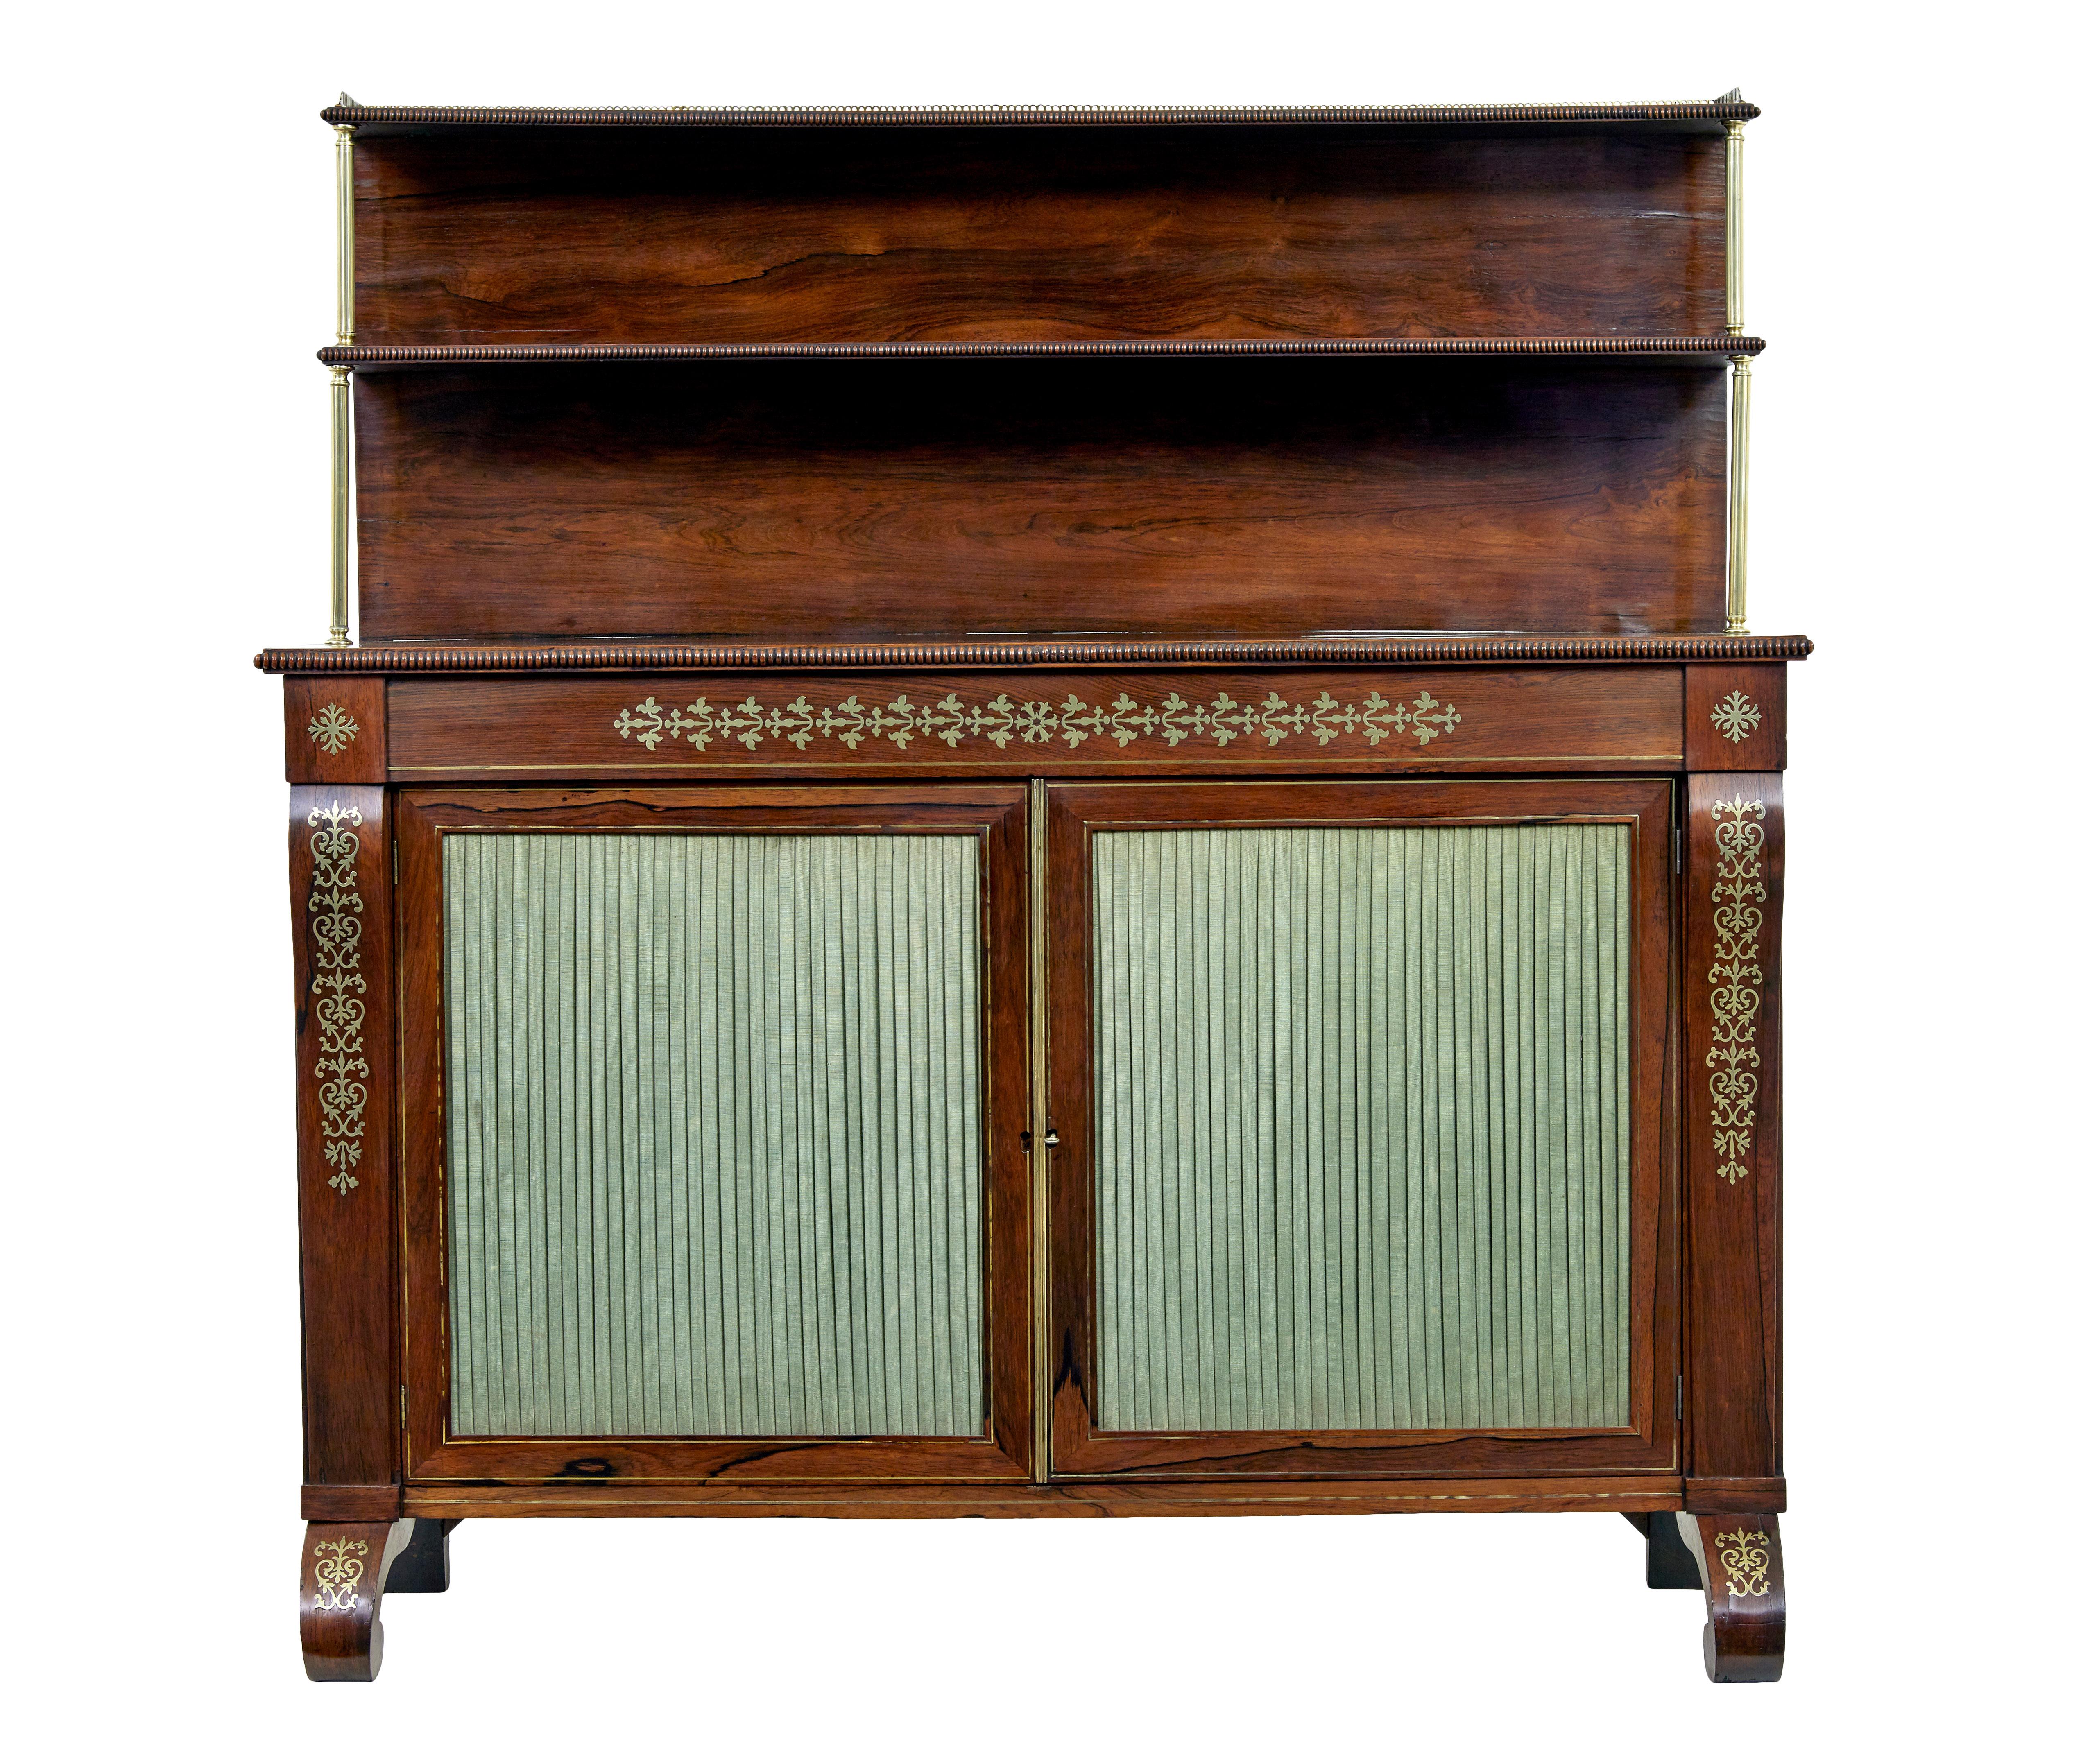 Fine quality regency period chiffonier circa 1820.

Top shelf with brass gallery detailed with a beaded edge. Second shelf supported by brass column supports.  Main body beautifully decorated with inlaid brass designs to the front and legs.  Double